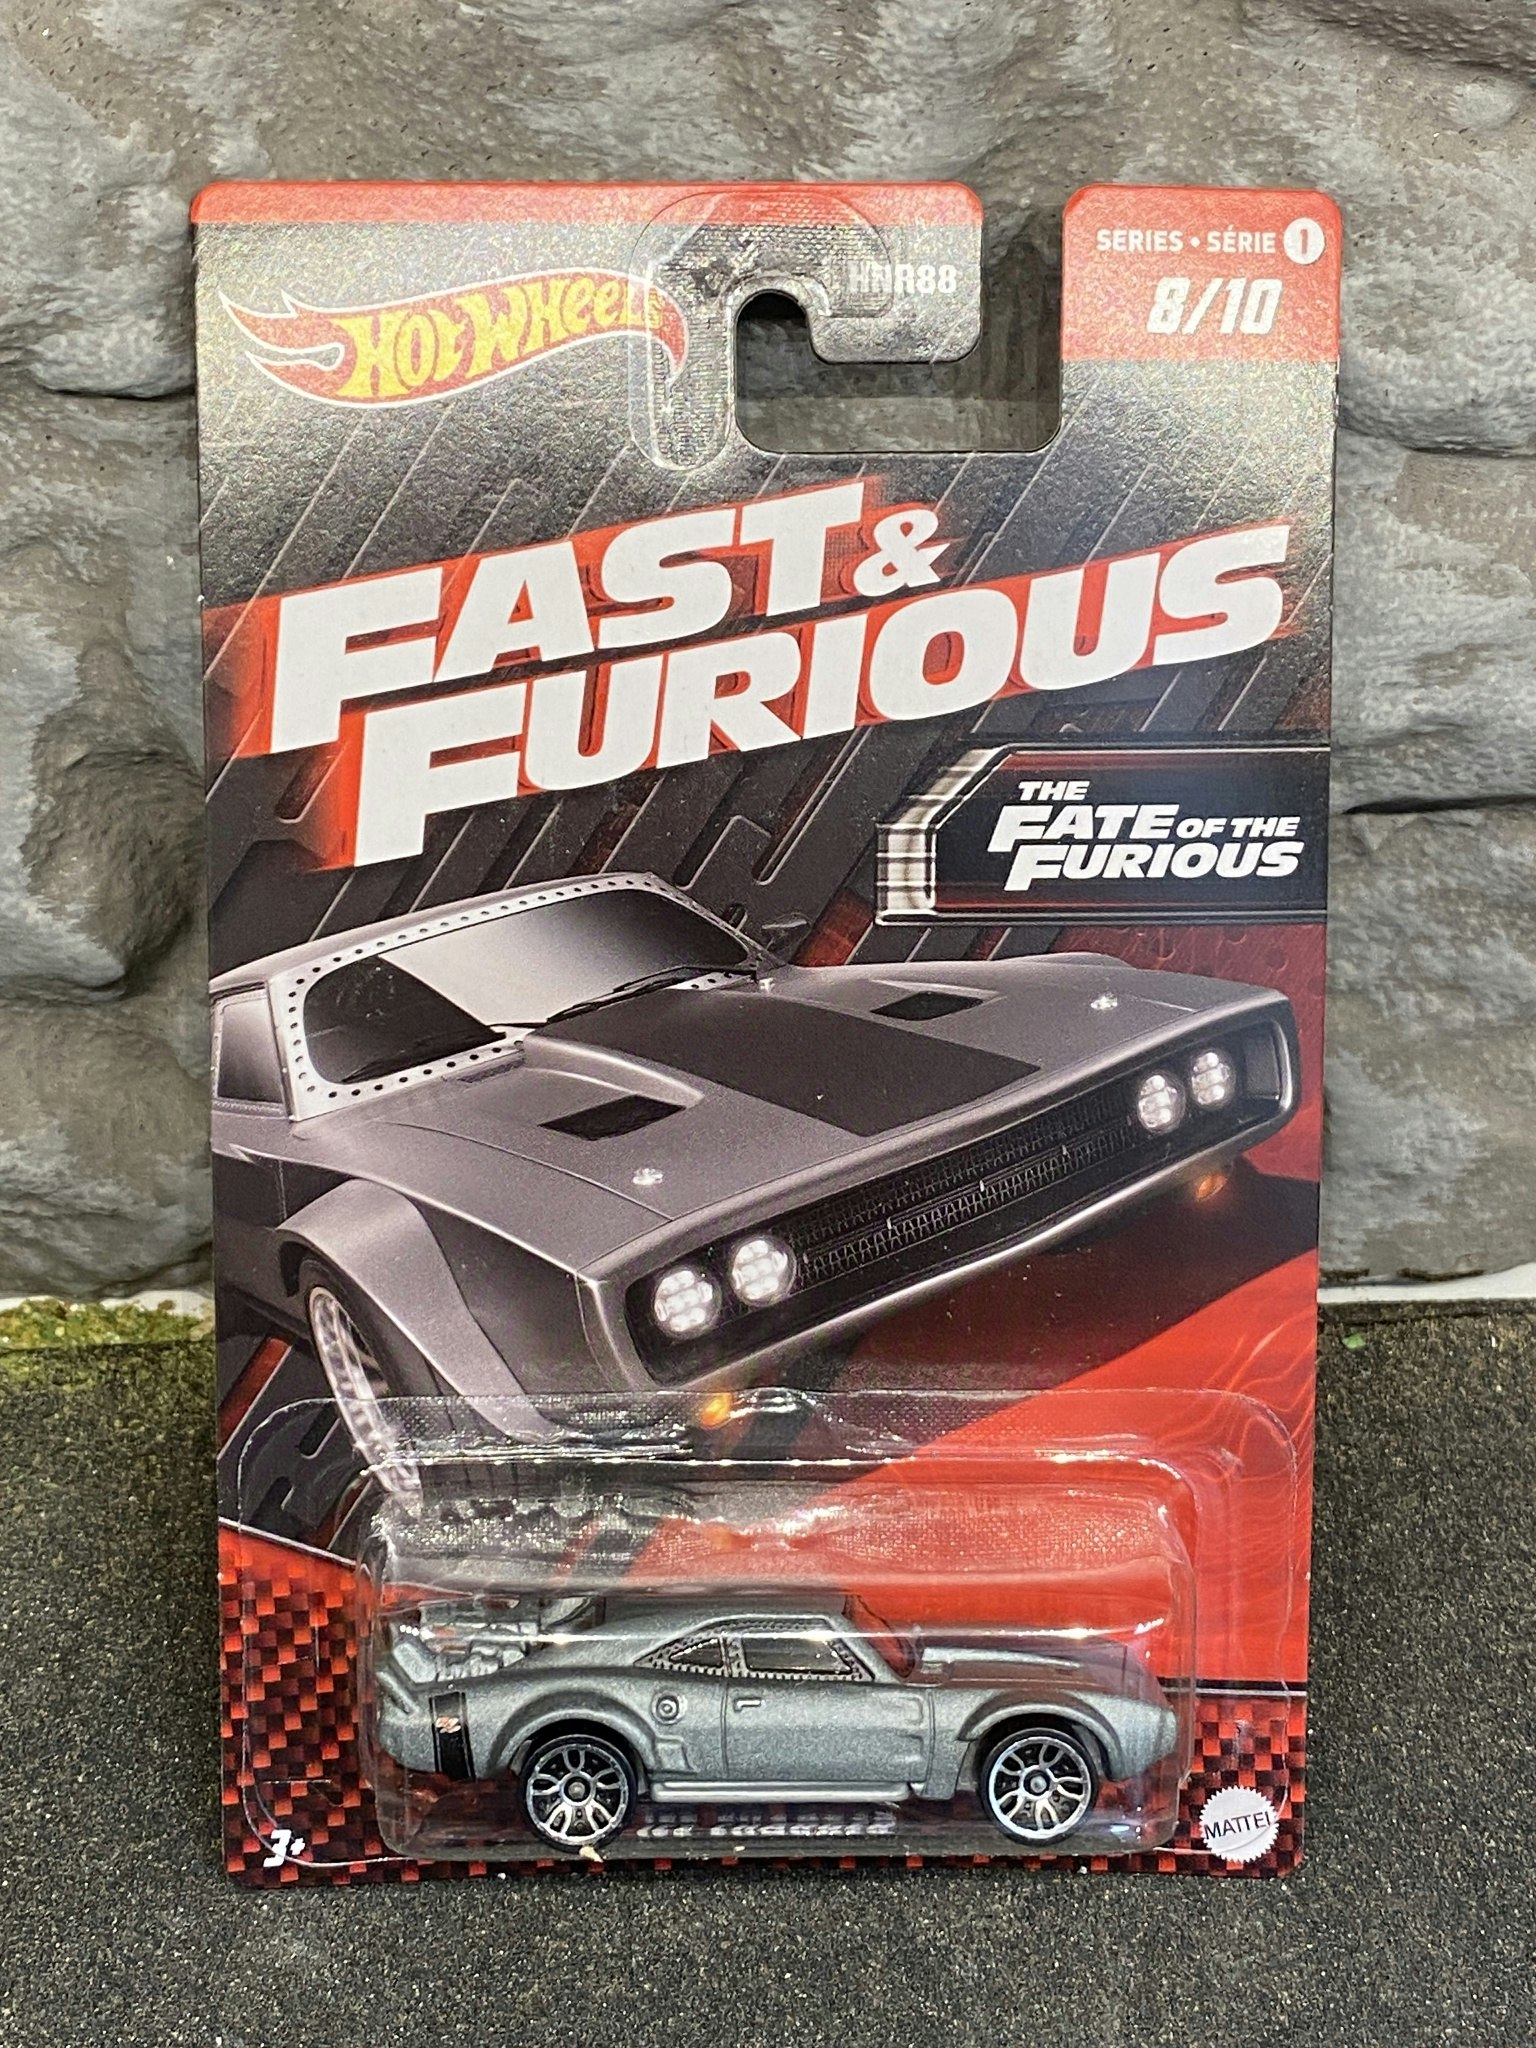 Skala 1/64 Hot Wheels "Fast & Furious" - Ice Charger